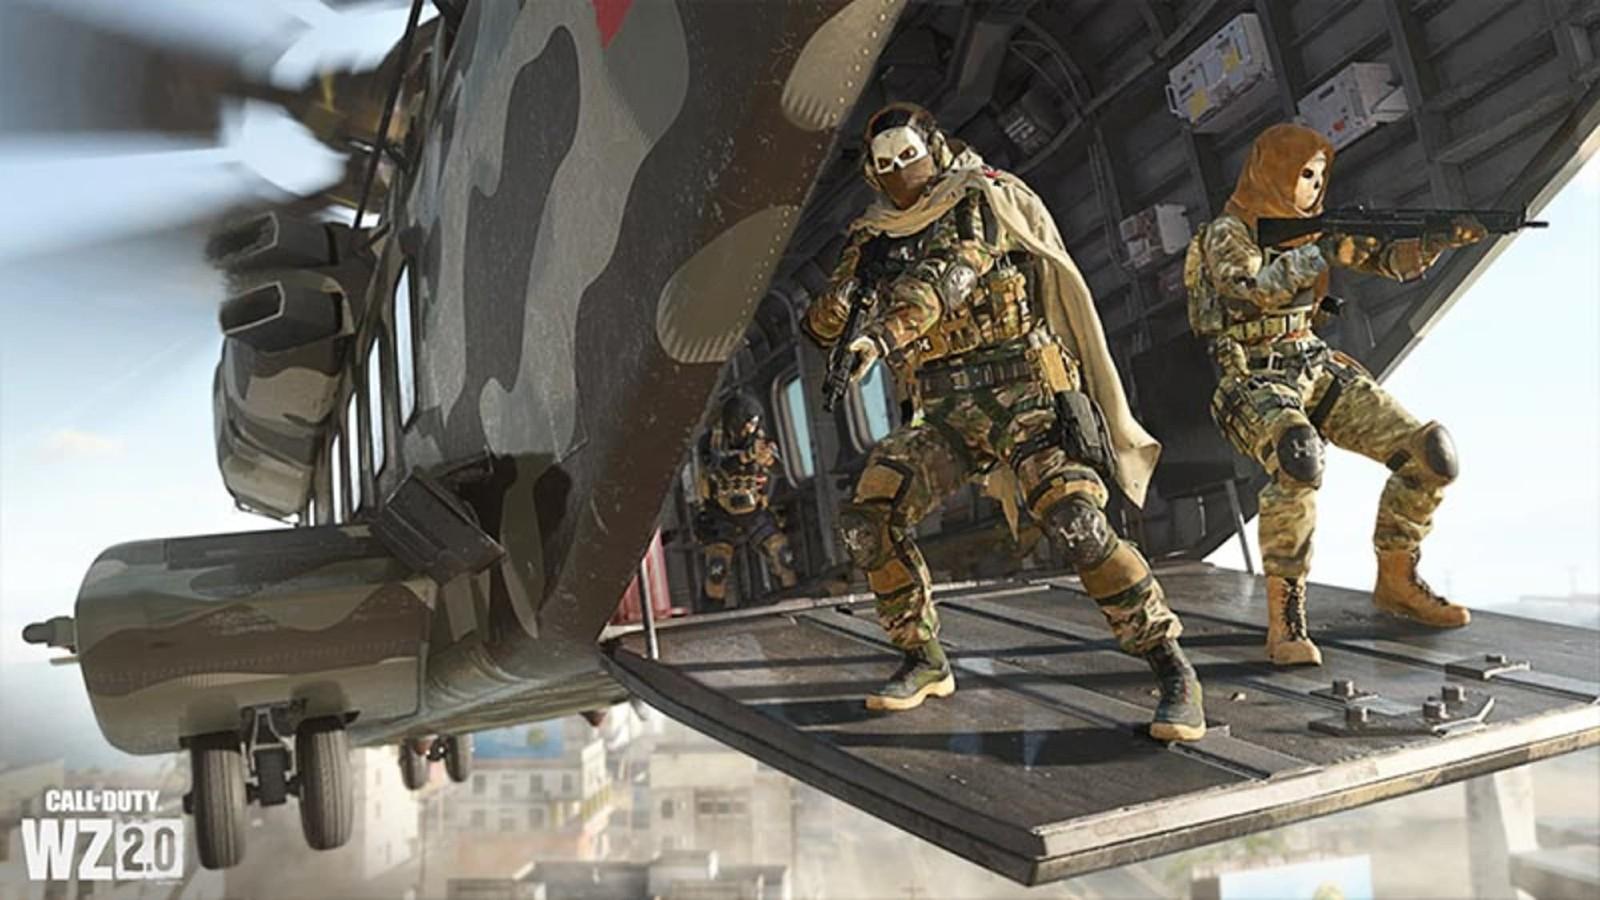 MW2, Warzone 2.0 Season 3 release date and time